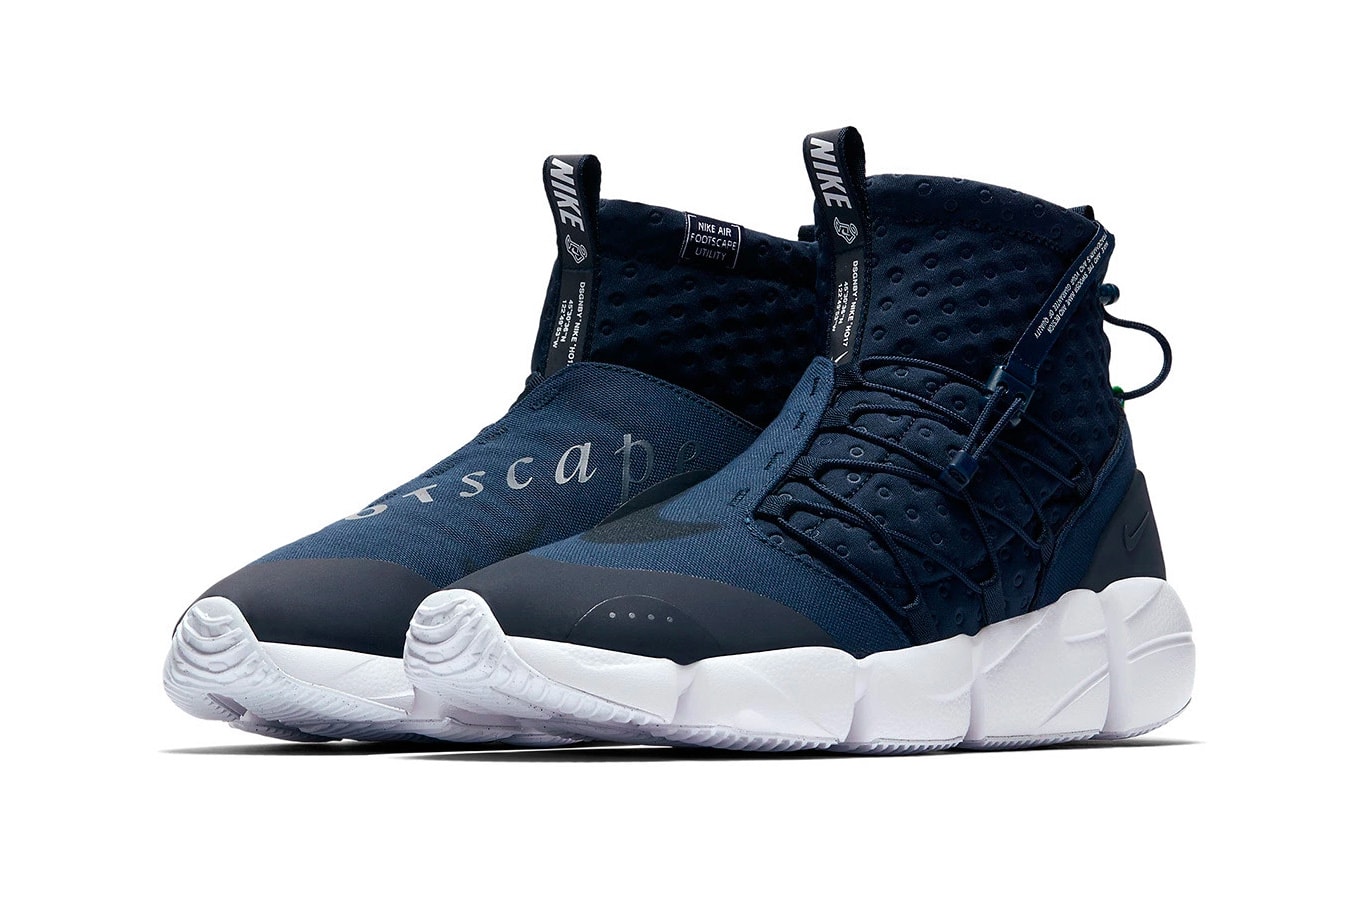 Nike Air Footscape Mid Utility spring 2018 release info new colorways purchase